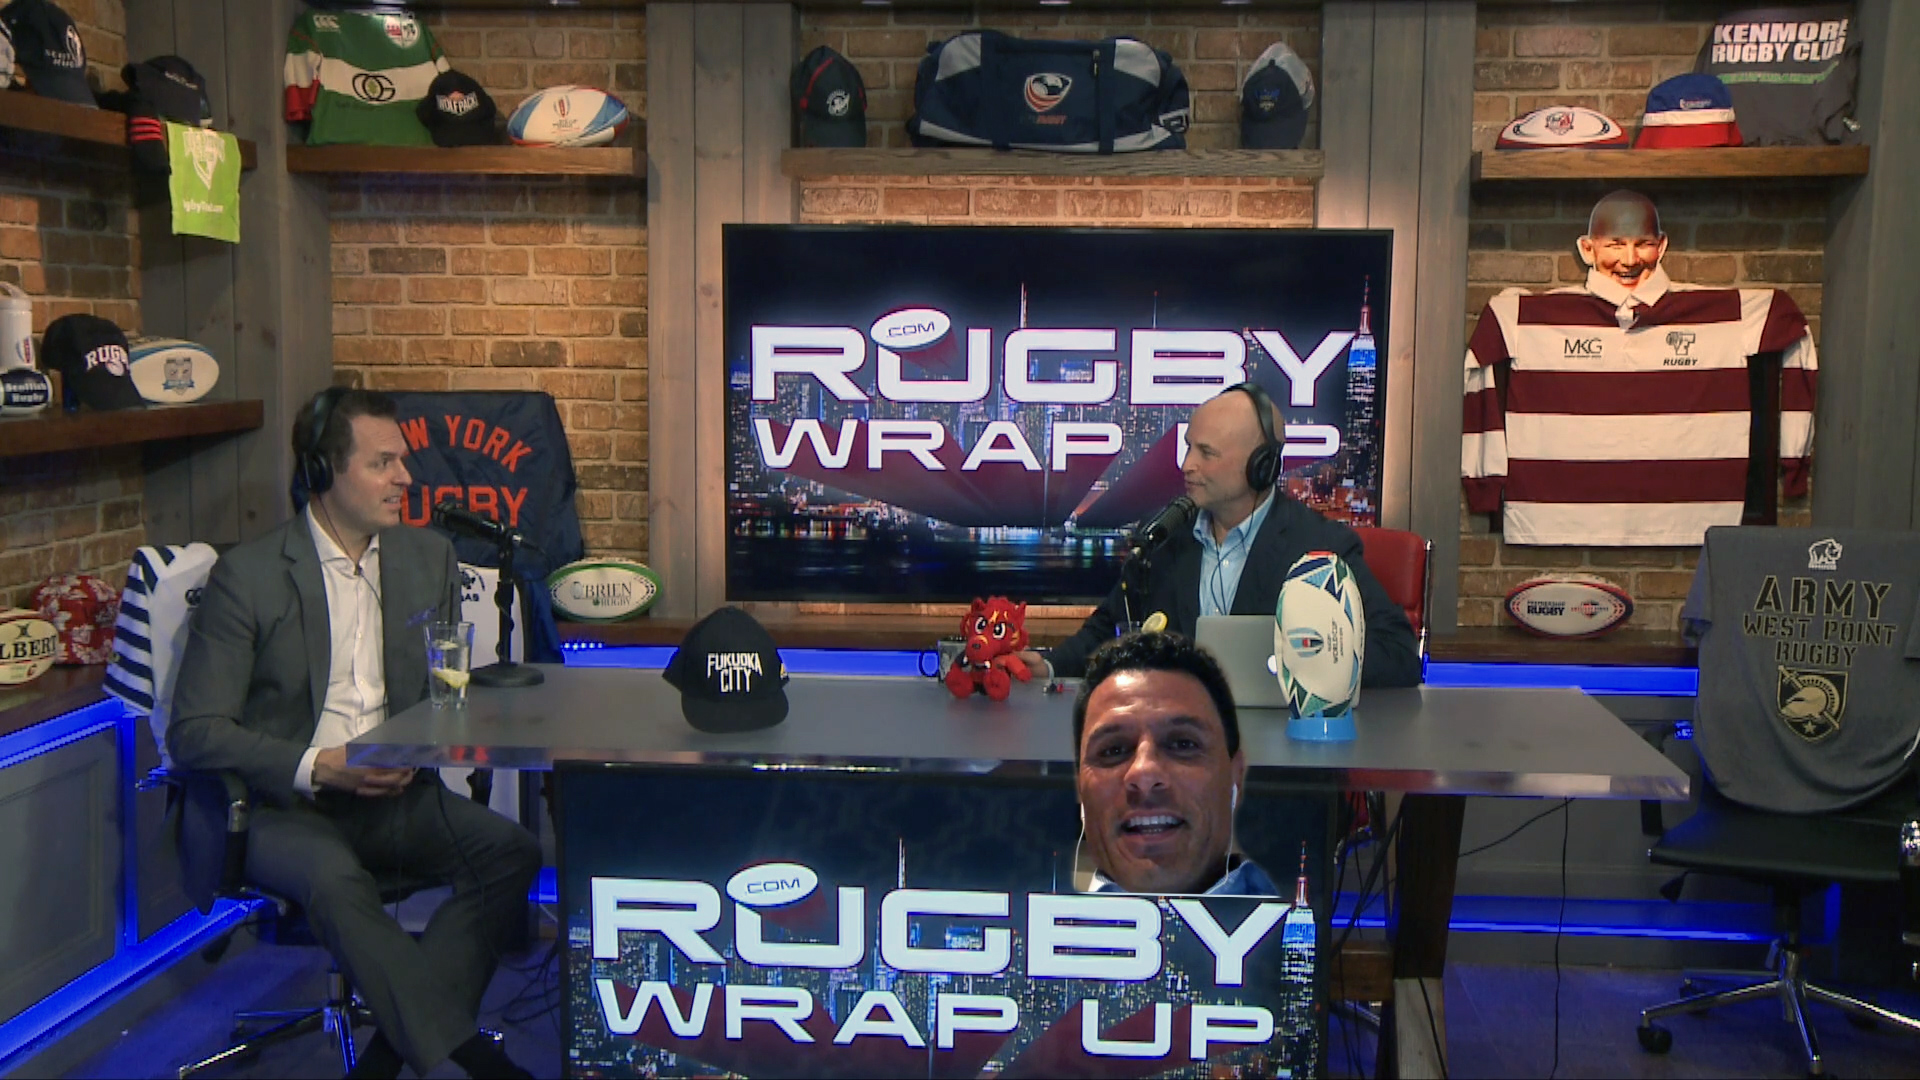 Munster_Rugby, Dave_Howlett, Pat_Tully, Matt_McCarthy, Rugby_Wrap_Up, The Ireland Funds